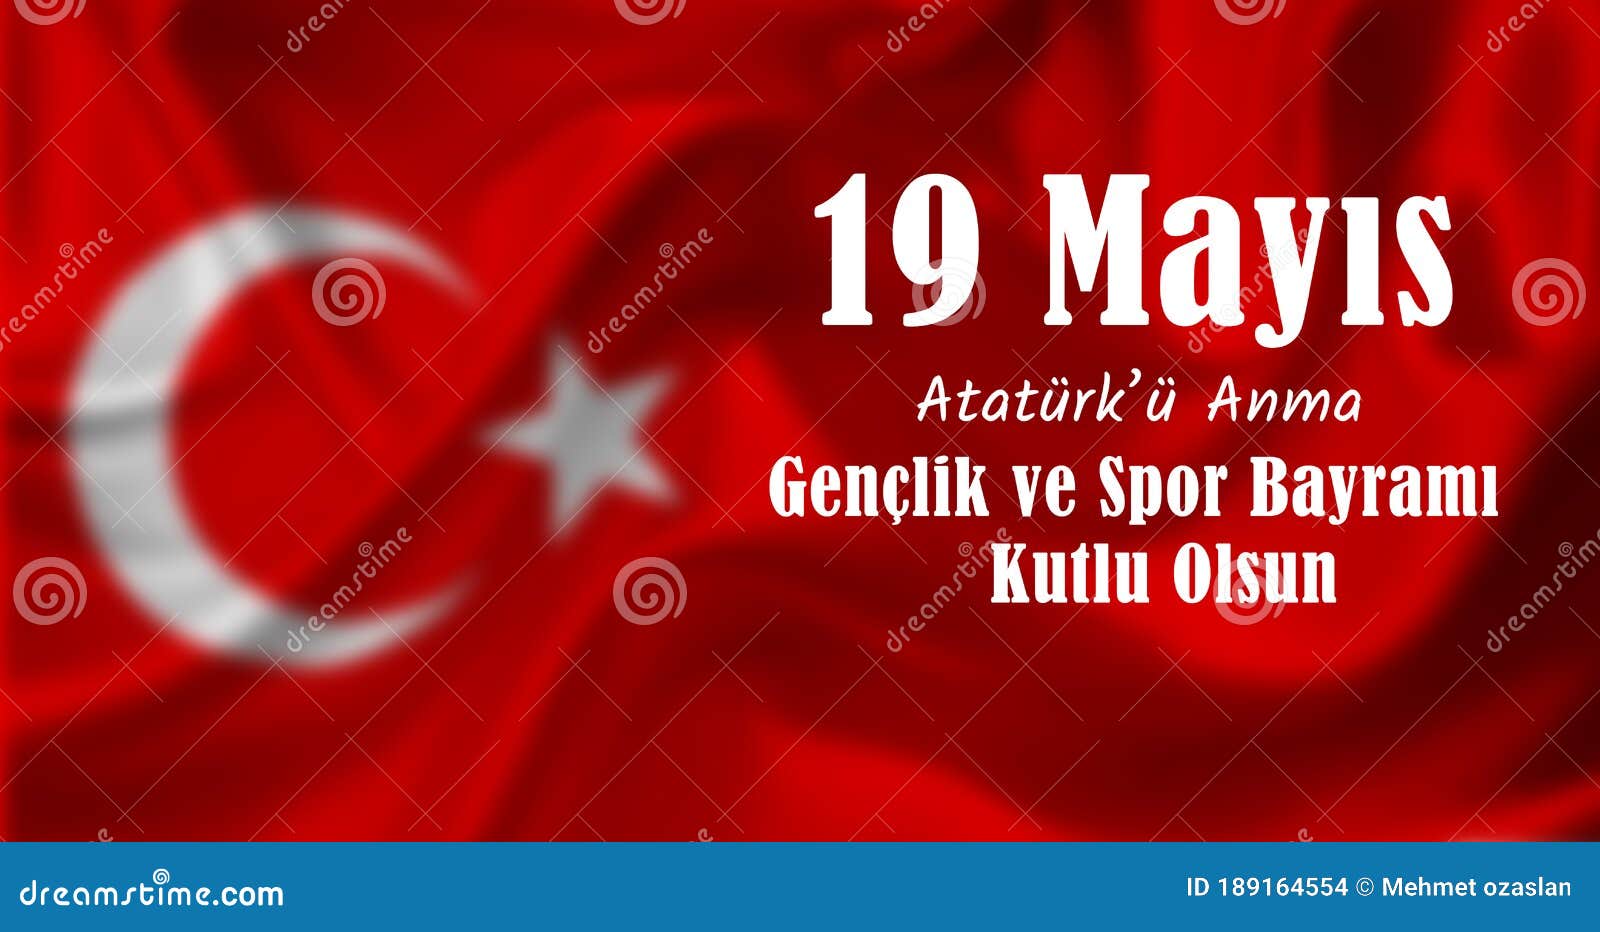 turkish 19 may ataturk commemorates youth and sports festival